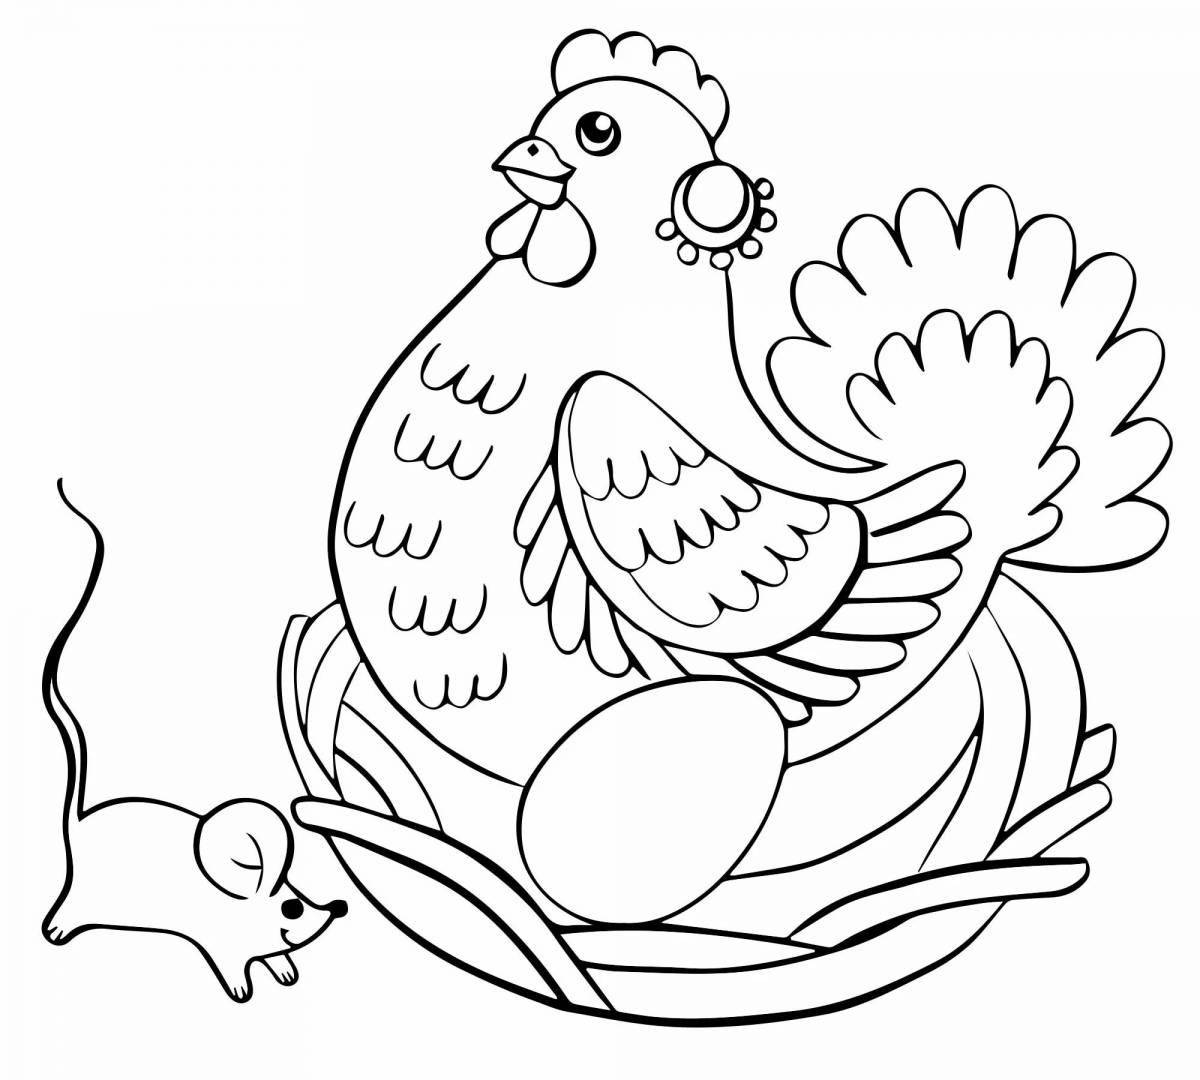 Attractive coloring page Ryaba chick for juniors